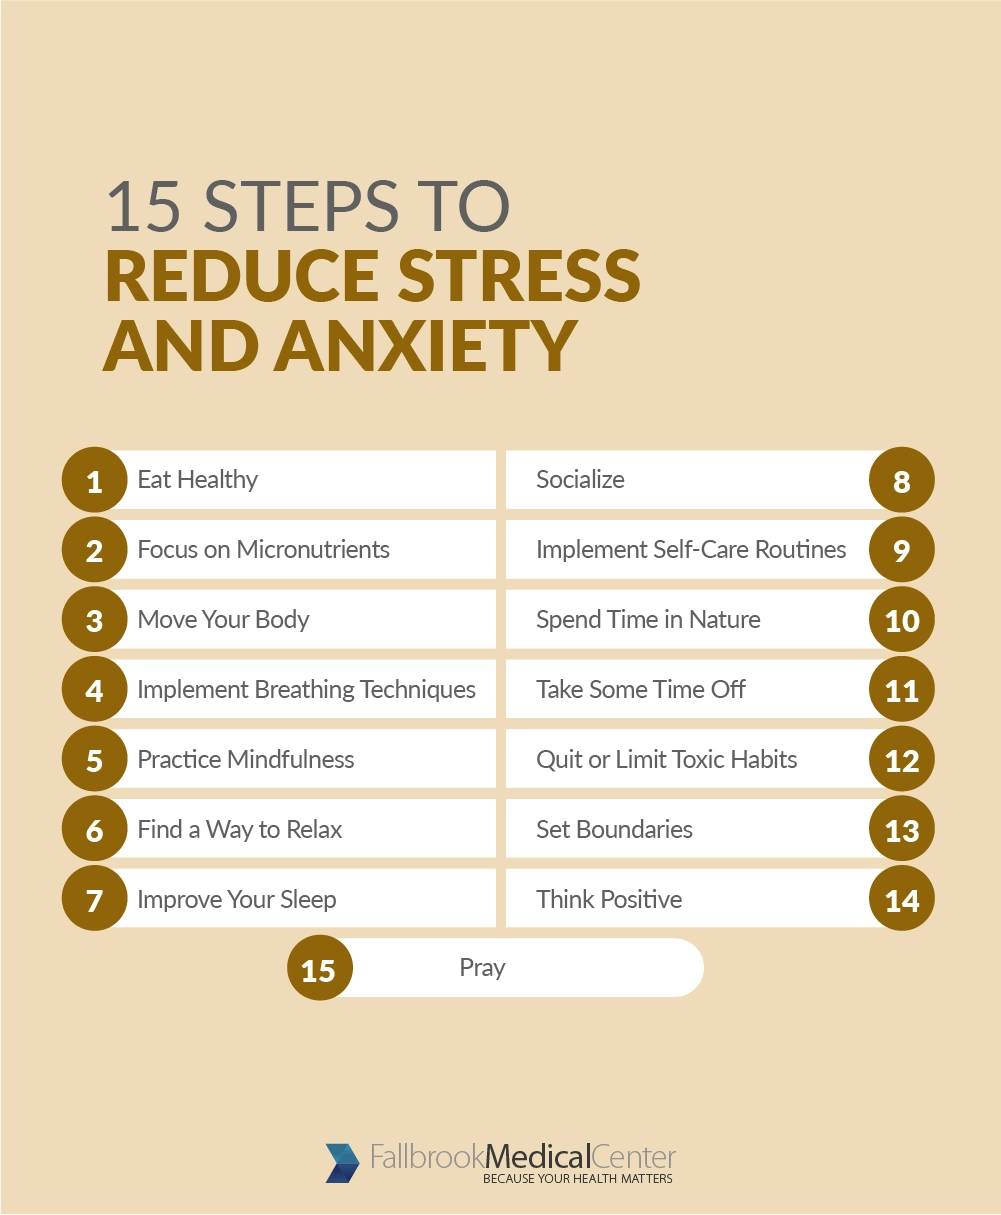 6 Relaxation Techniques to Reduce Stress and Anxiety